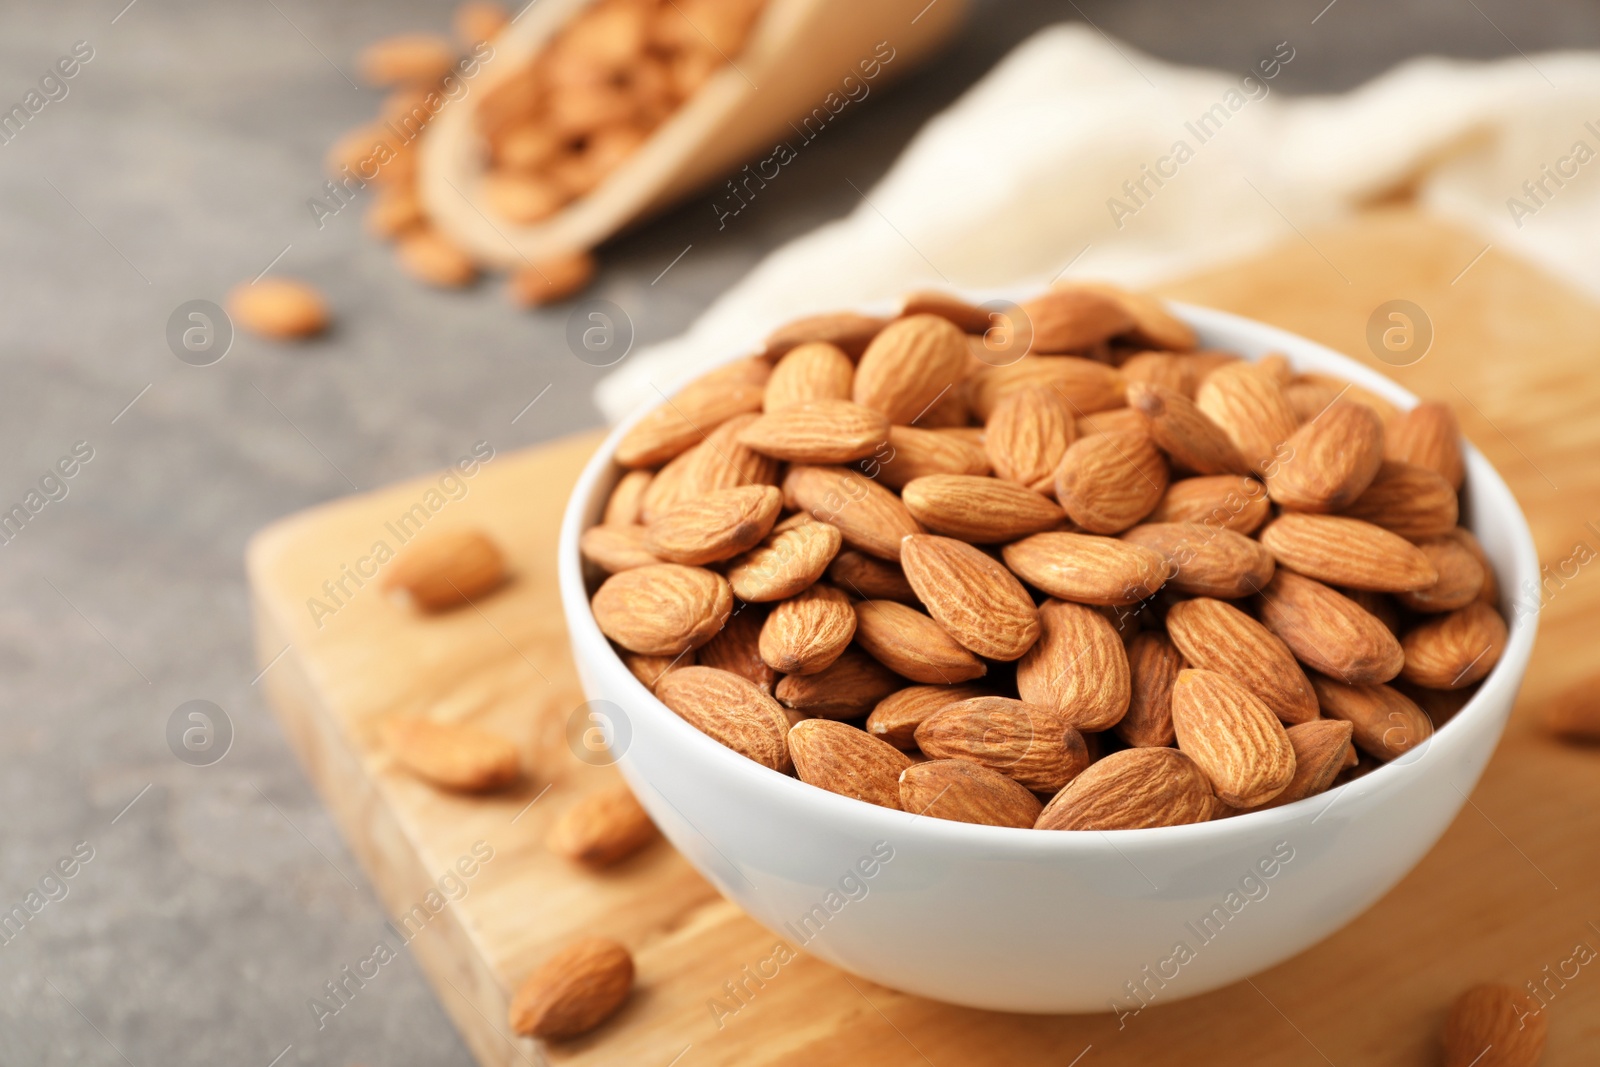 Photo of Wooden board with tasty organic almond nuts in bowl on table